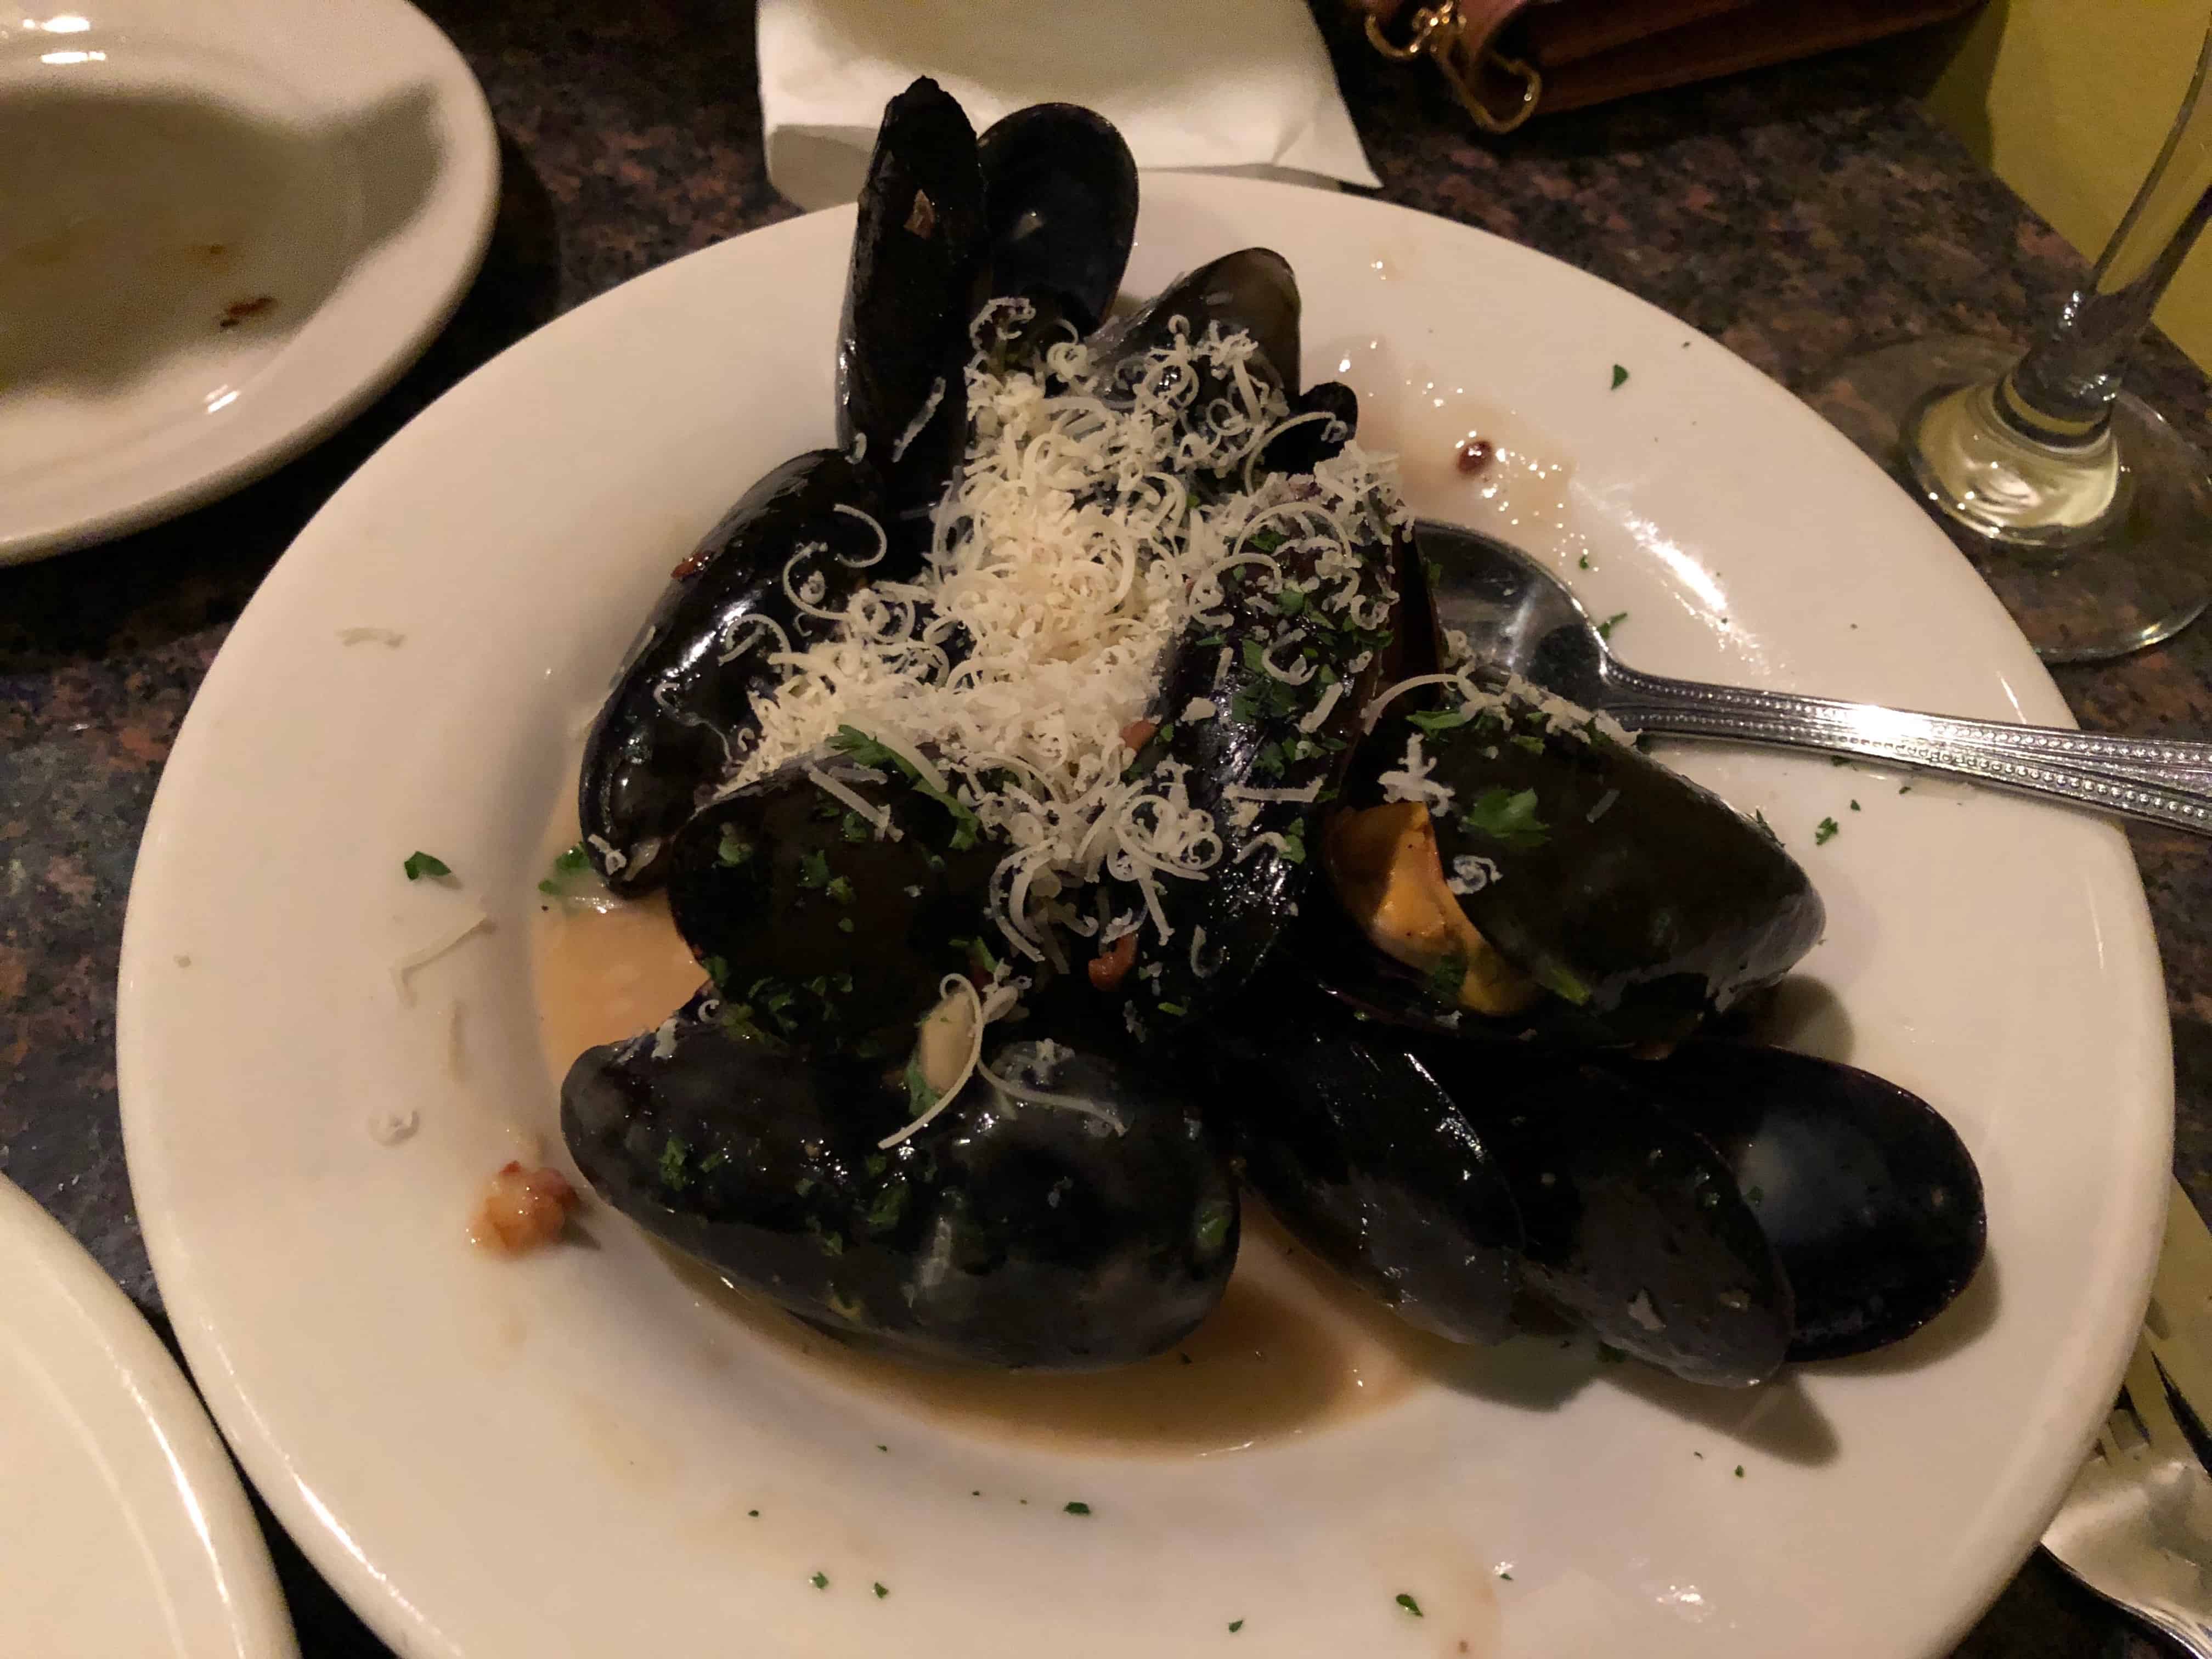 Mussels at Lucrezia in Chesterton, indiana